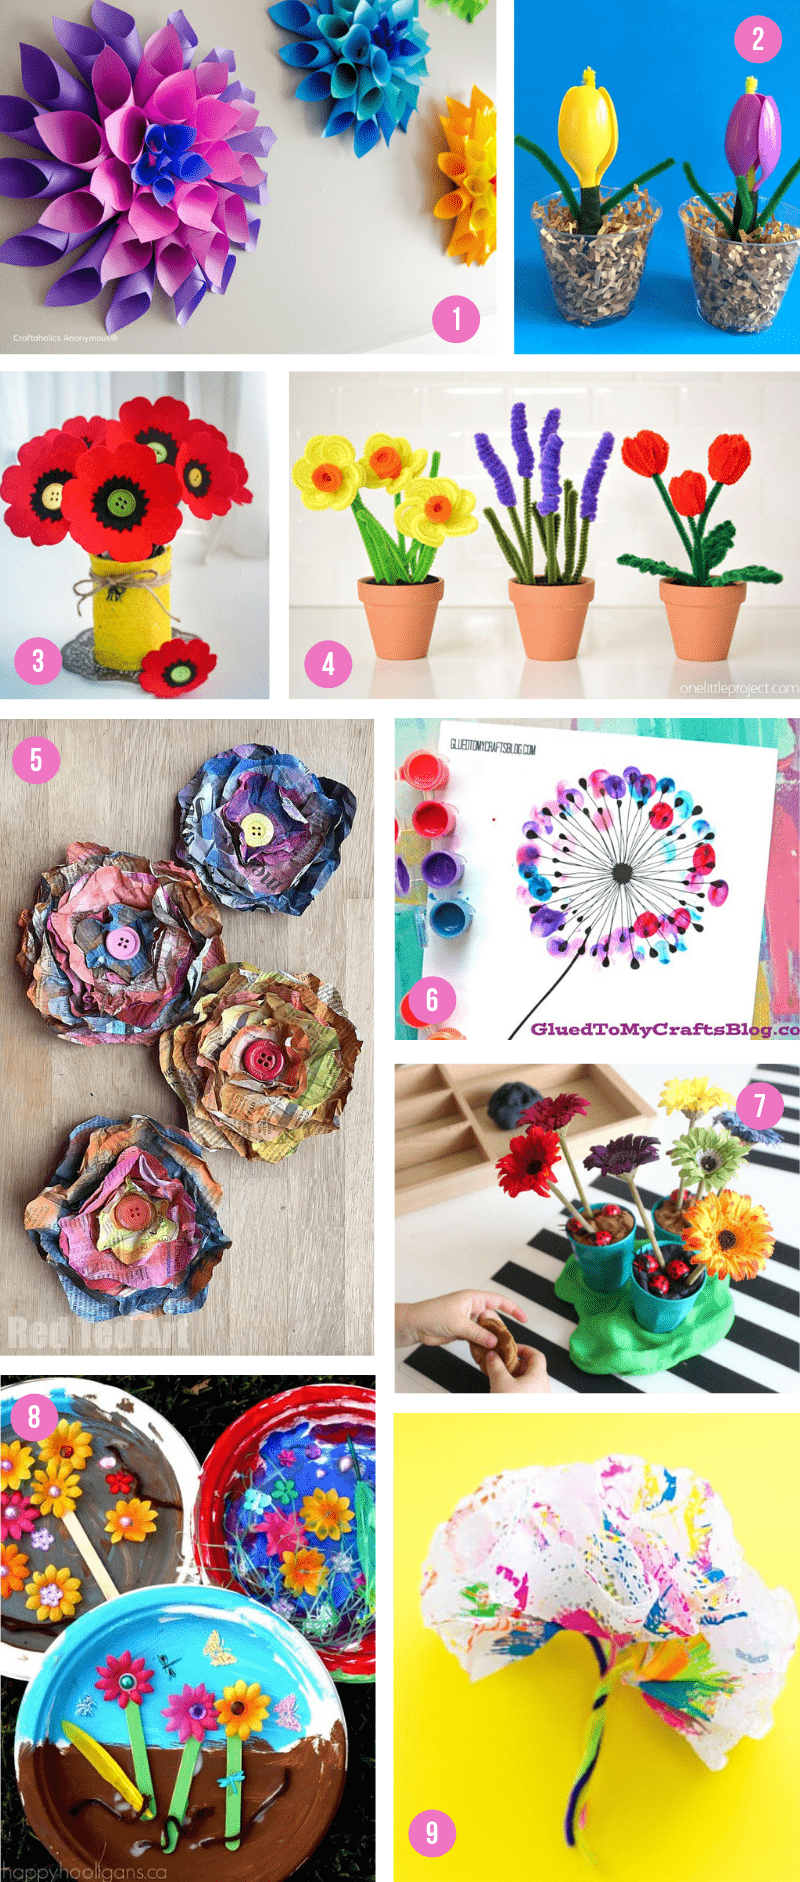 The Epic Collection Of Spring Crafts For Kids All The Best Art Projects Activities To Celebrate The Season What Moms Love